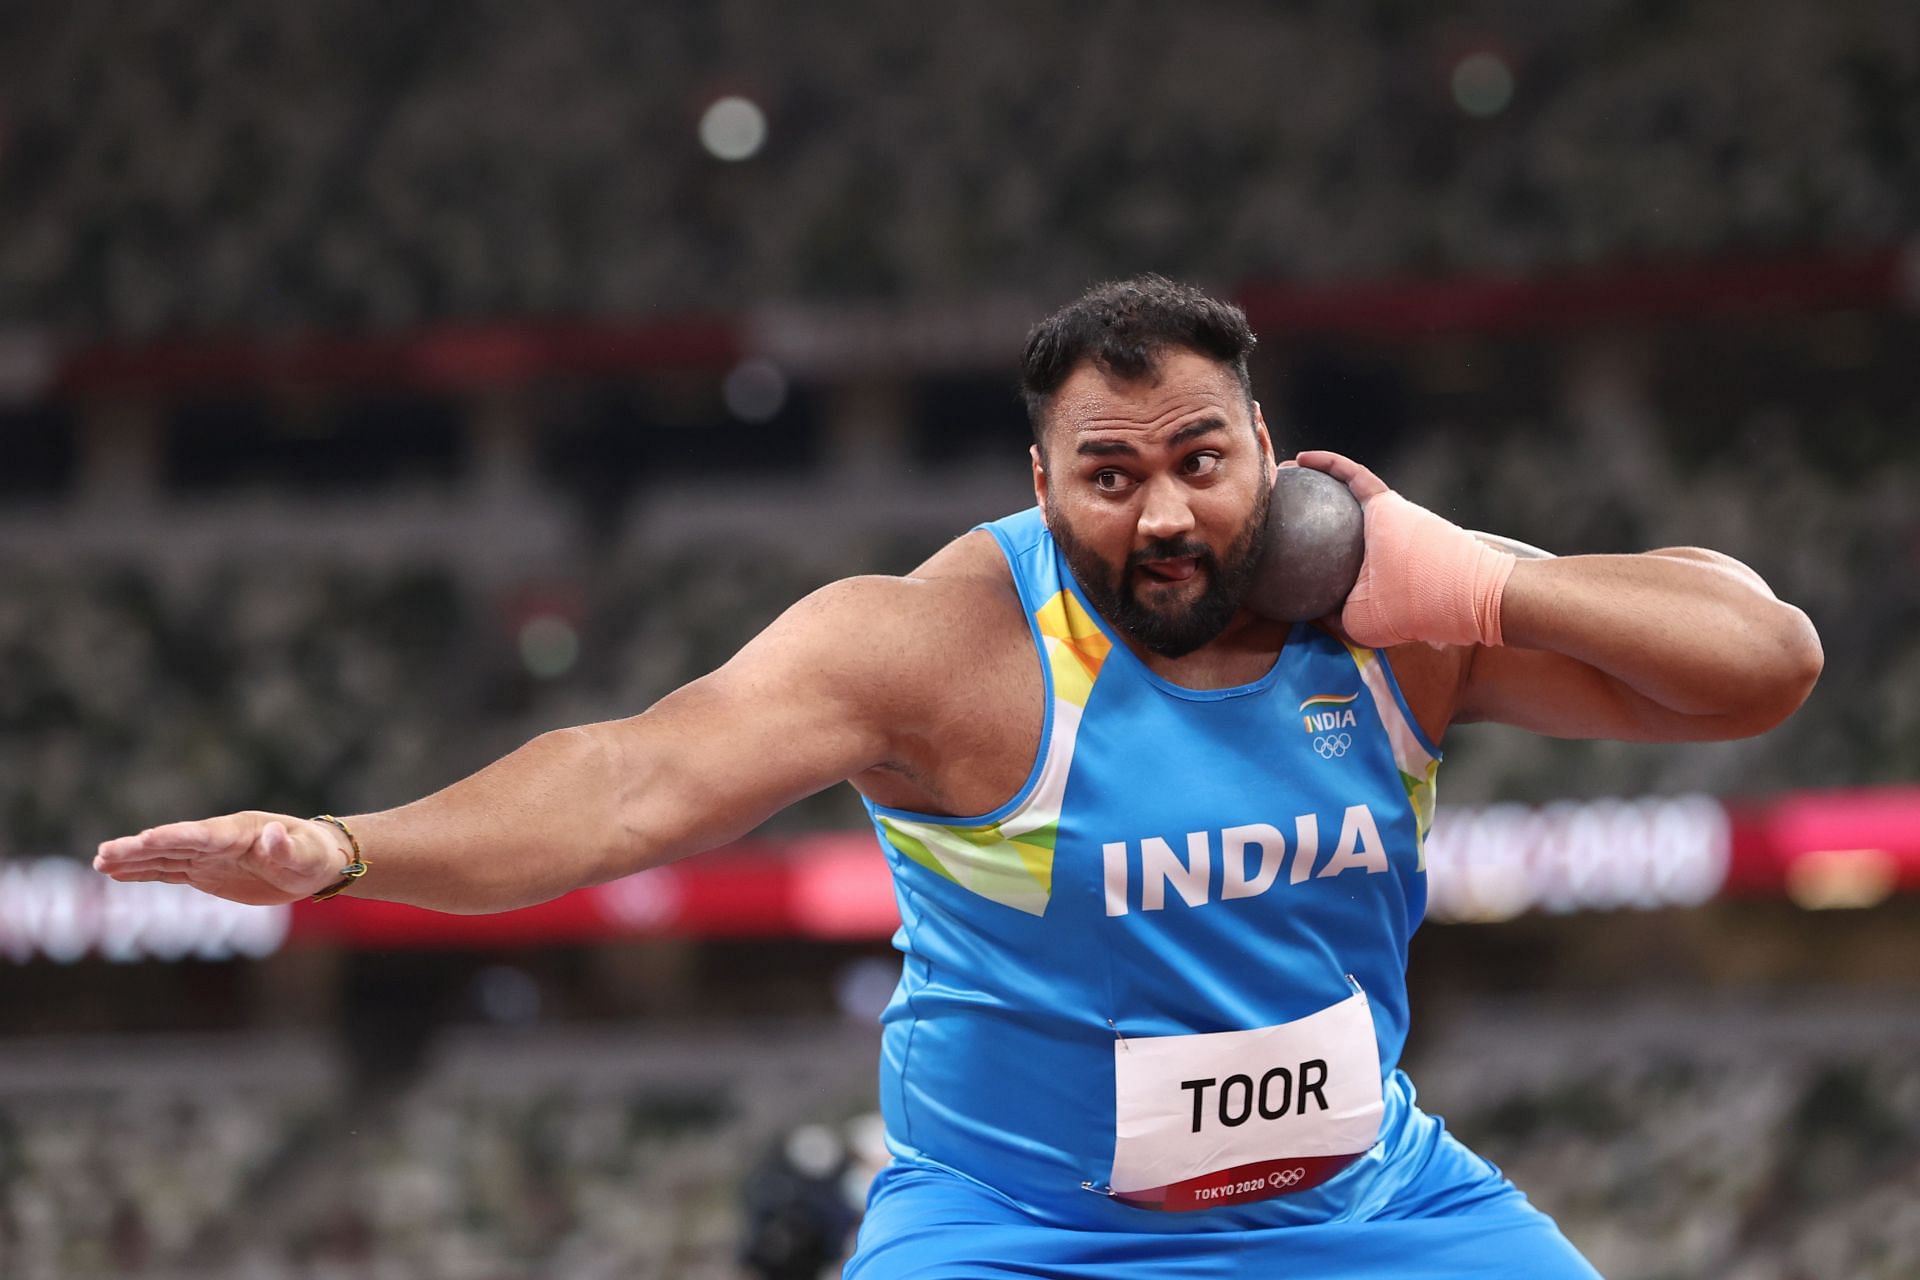 Tajinderpal Singh Toor in action at the Tokyo Olympics (Image courtesy: Getty Images)